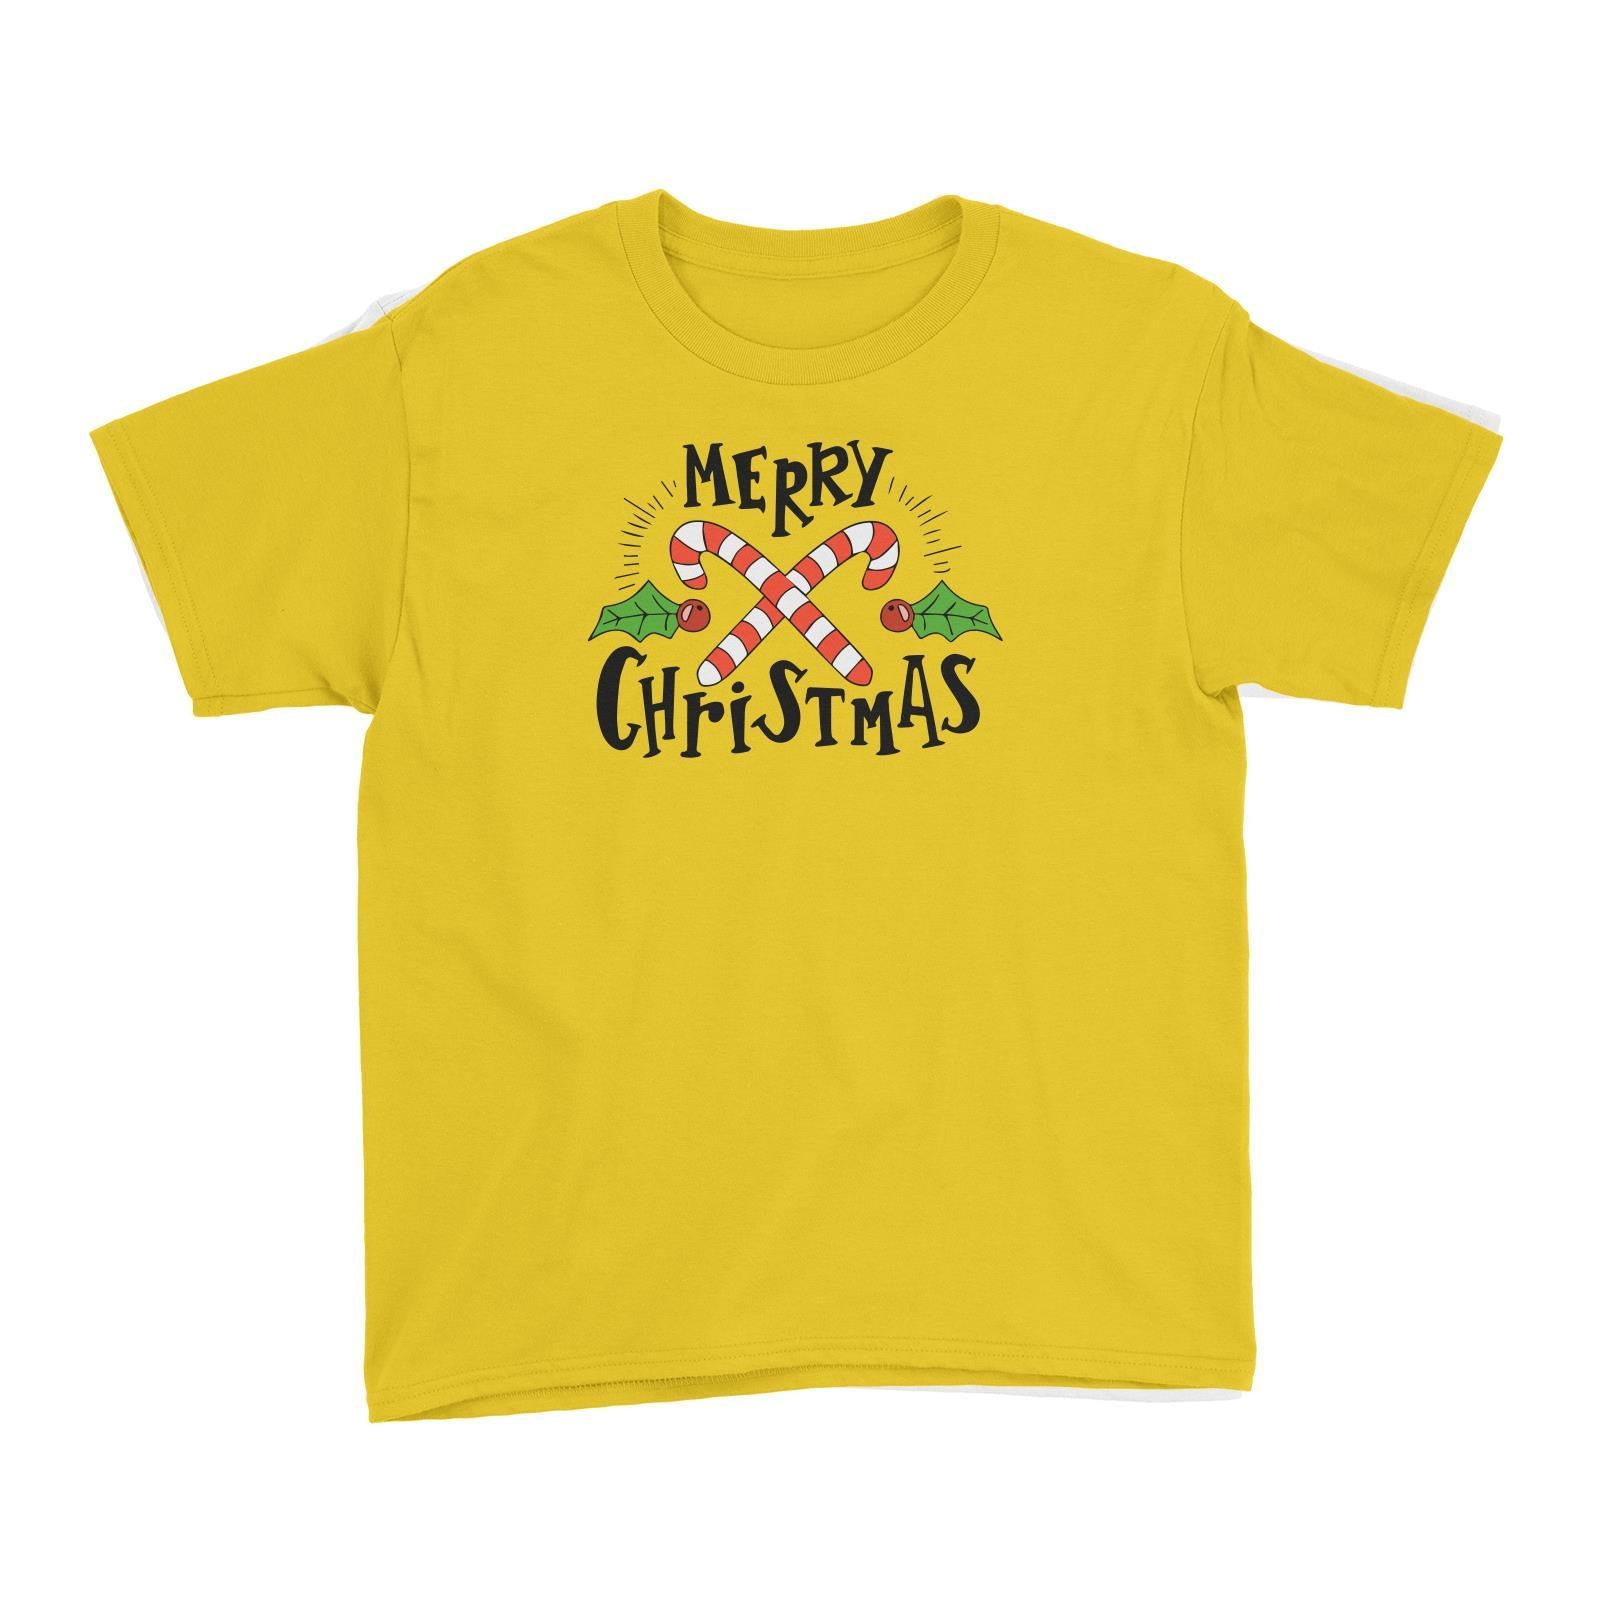 Merry Chrismas with Holly and Candy Cane Greeting Kid's T-Shirt Christmas Matching Family Lettering